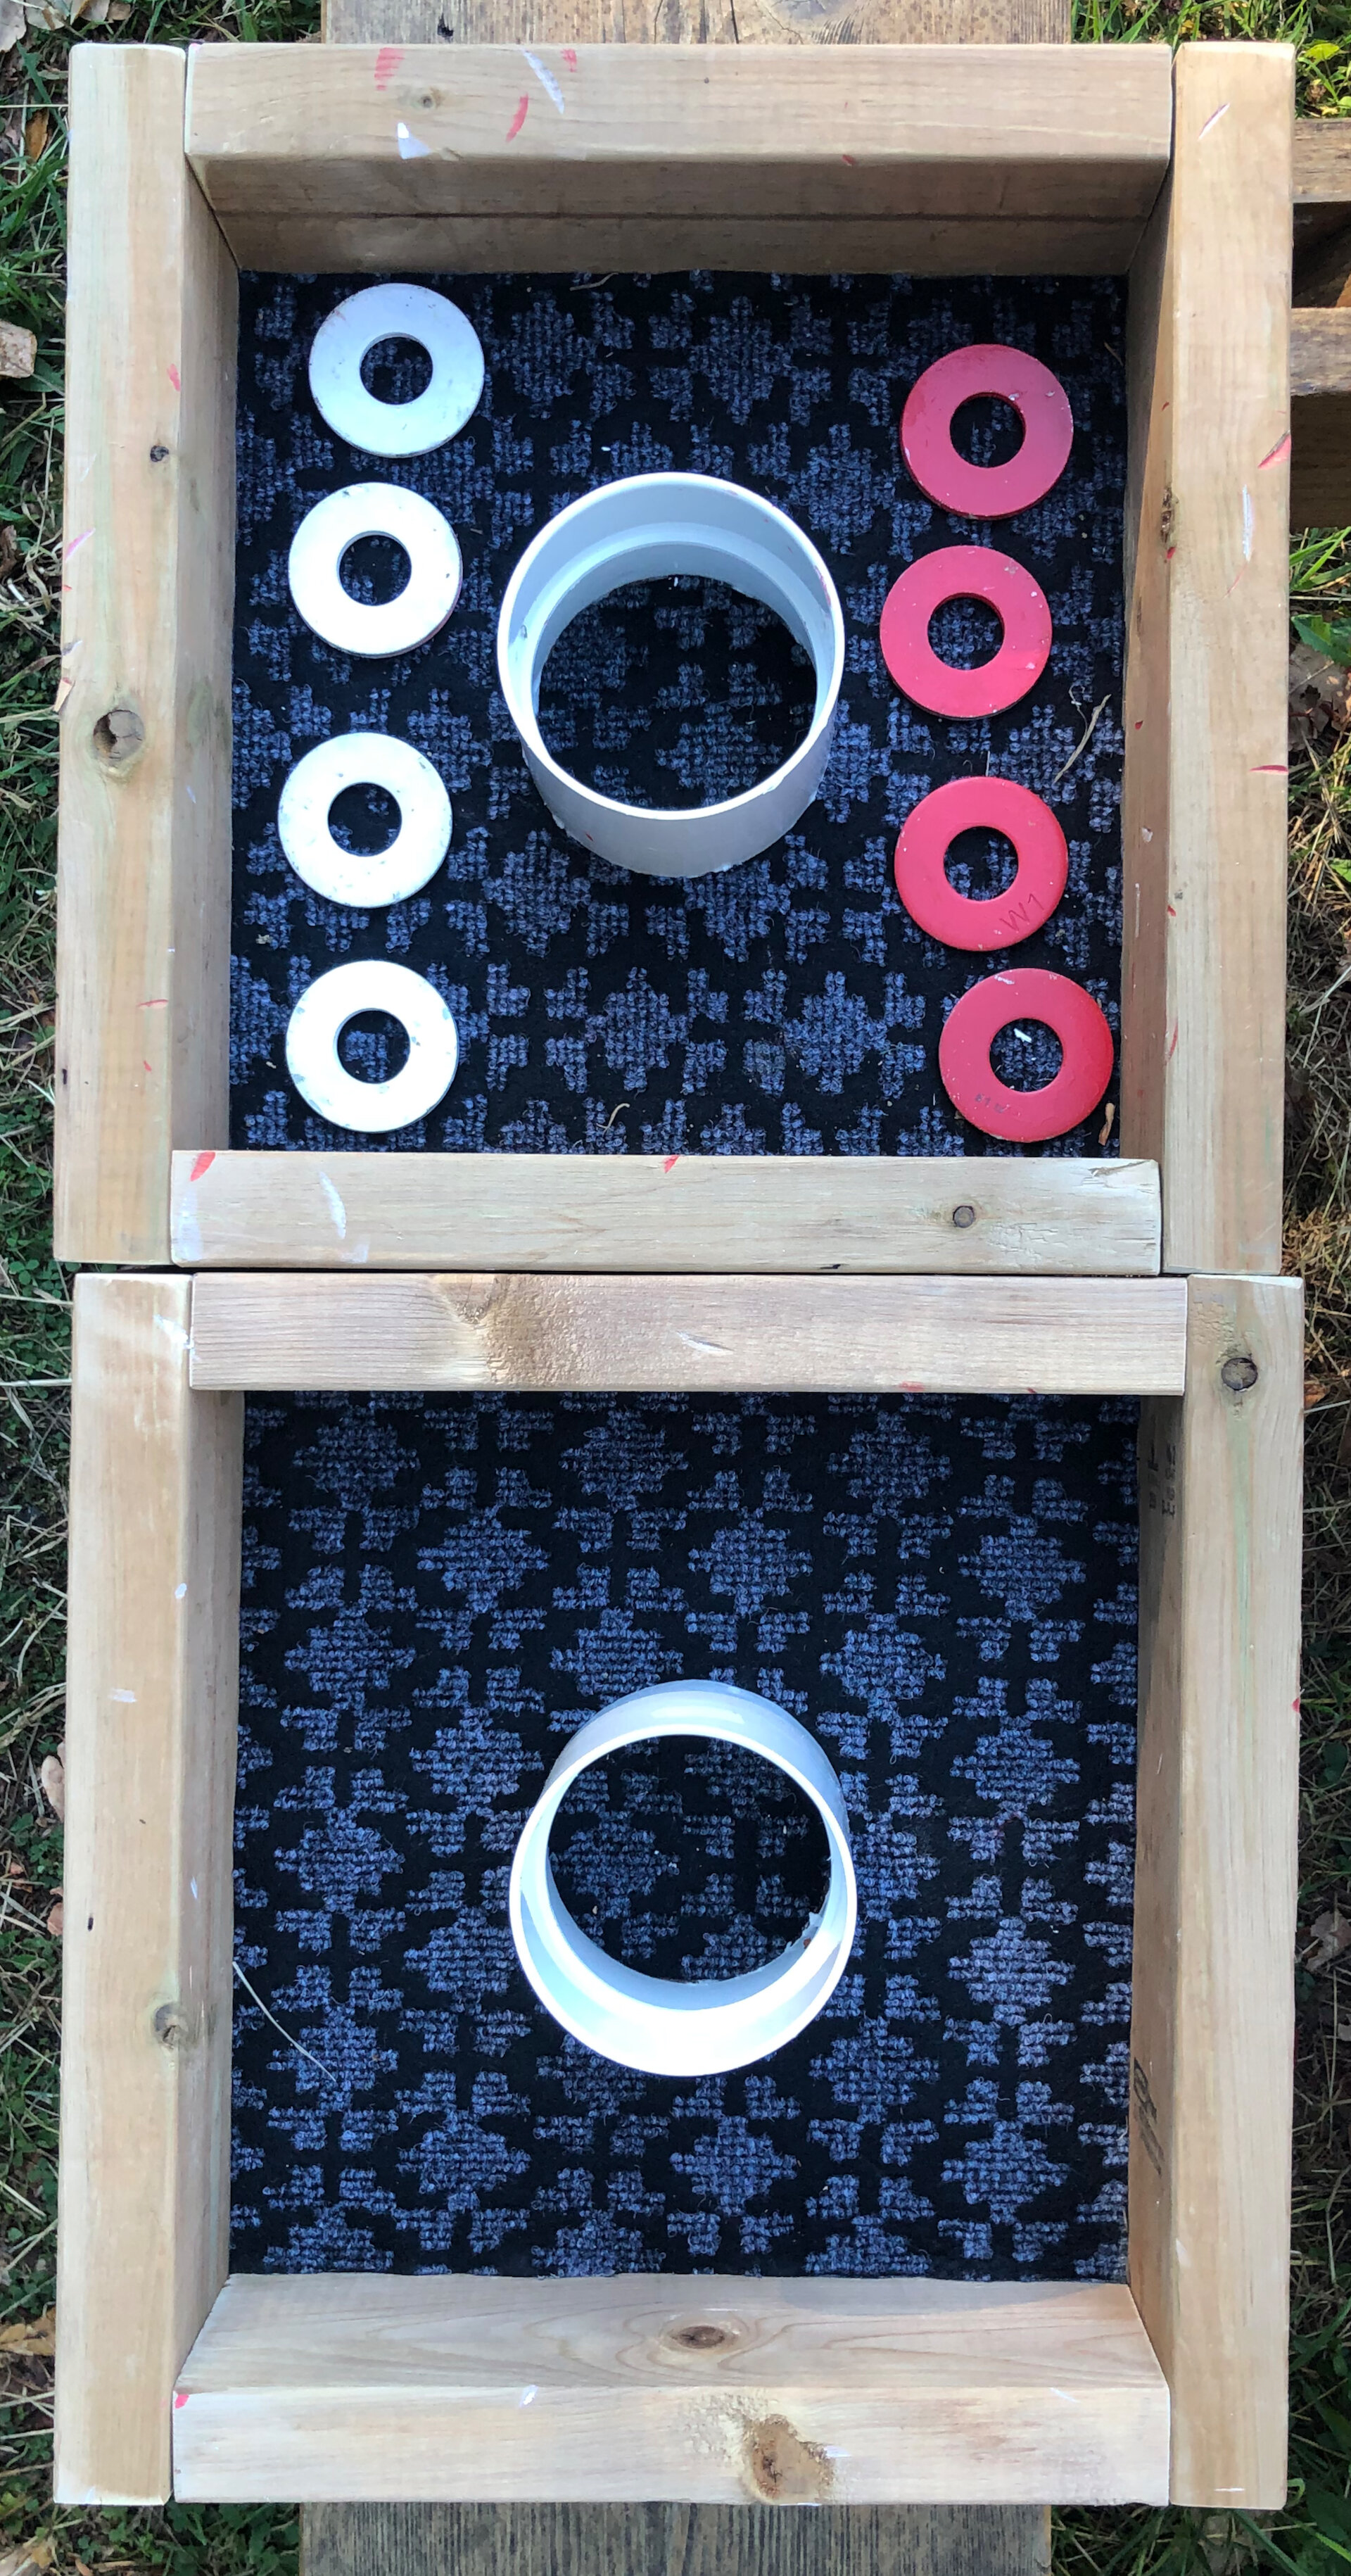  The finished washers game. 